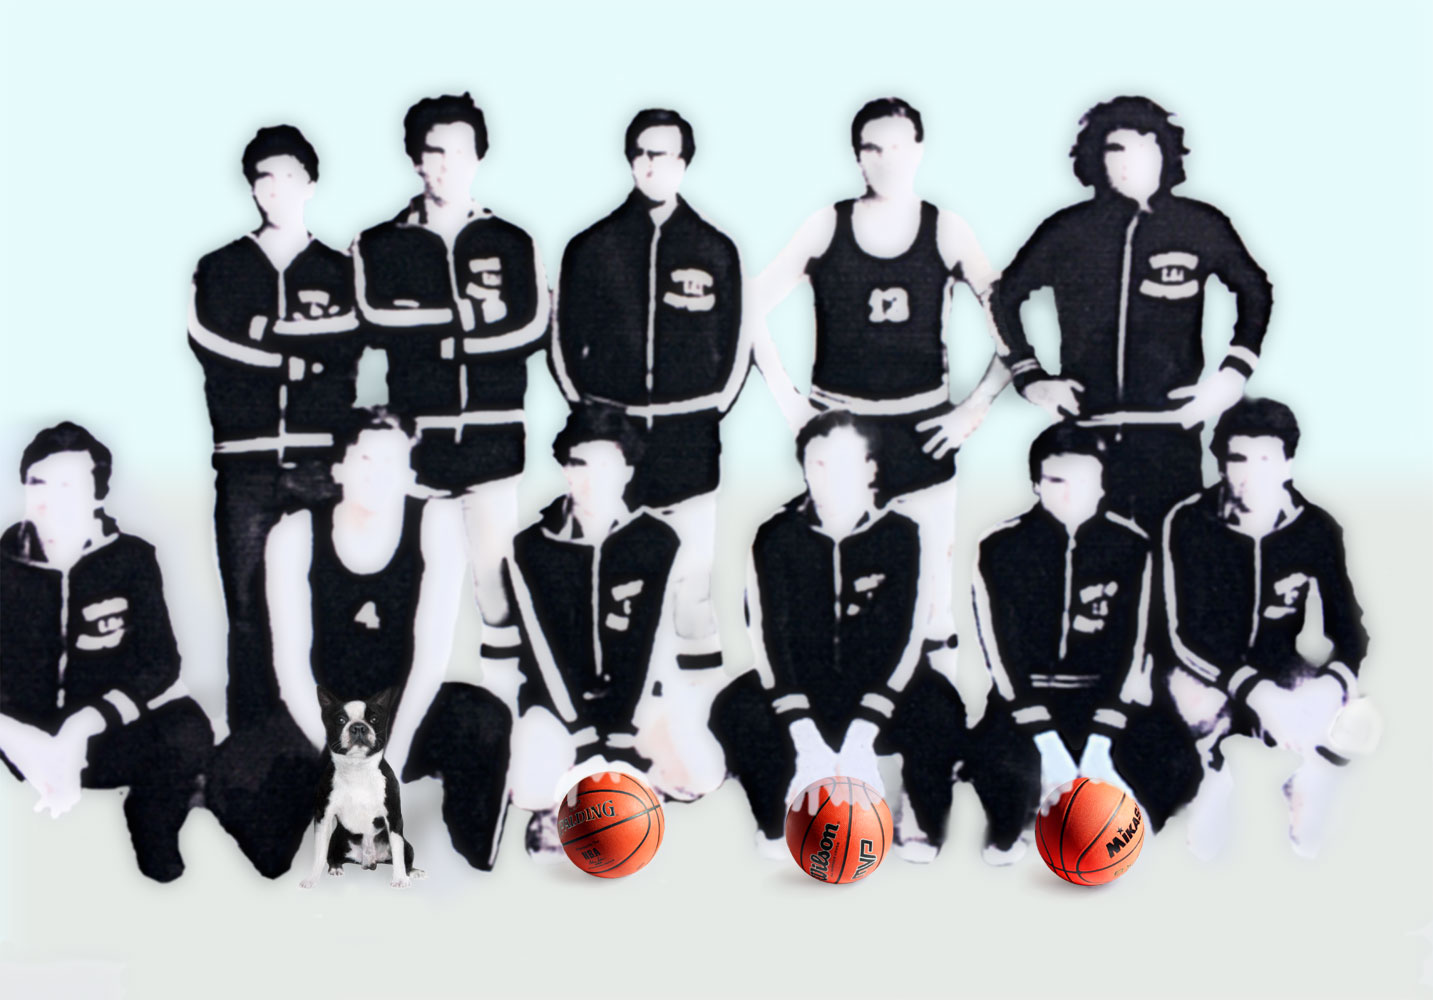 Michael Croft | Painting | Now Forever | Artist | Basketball